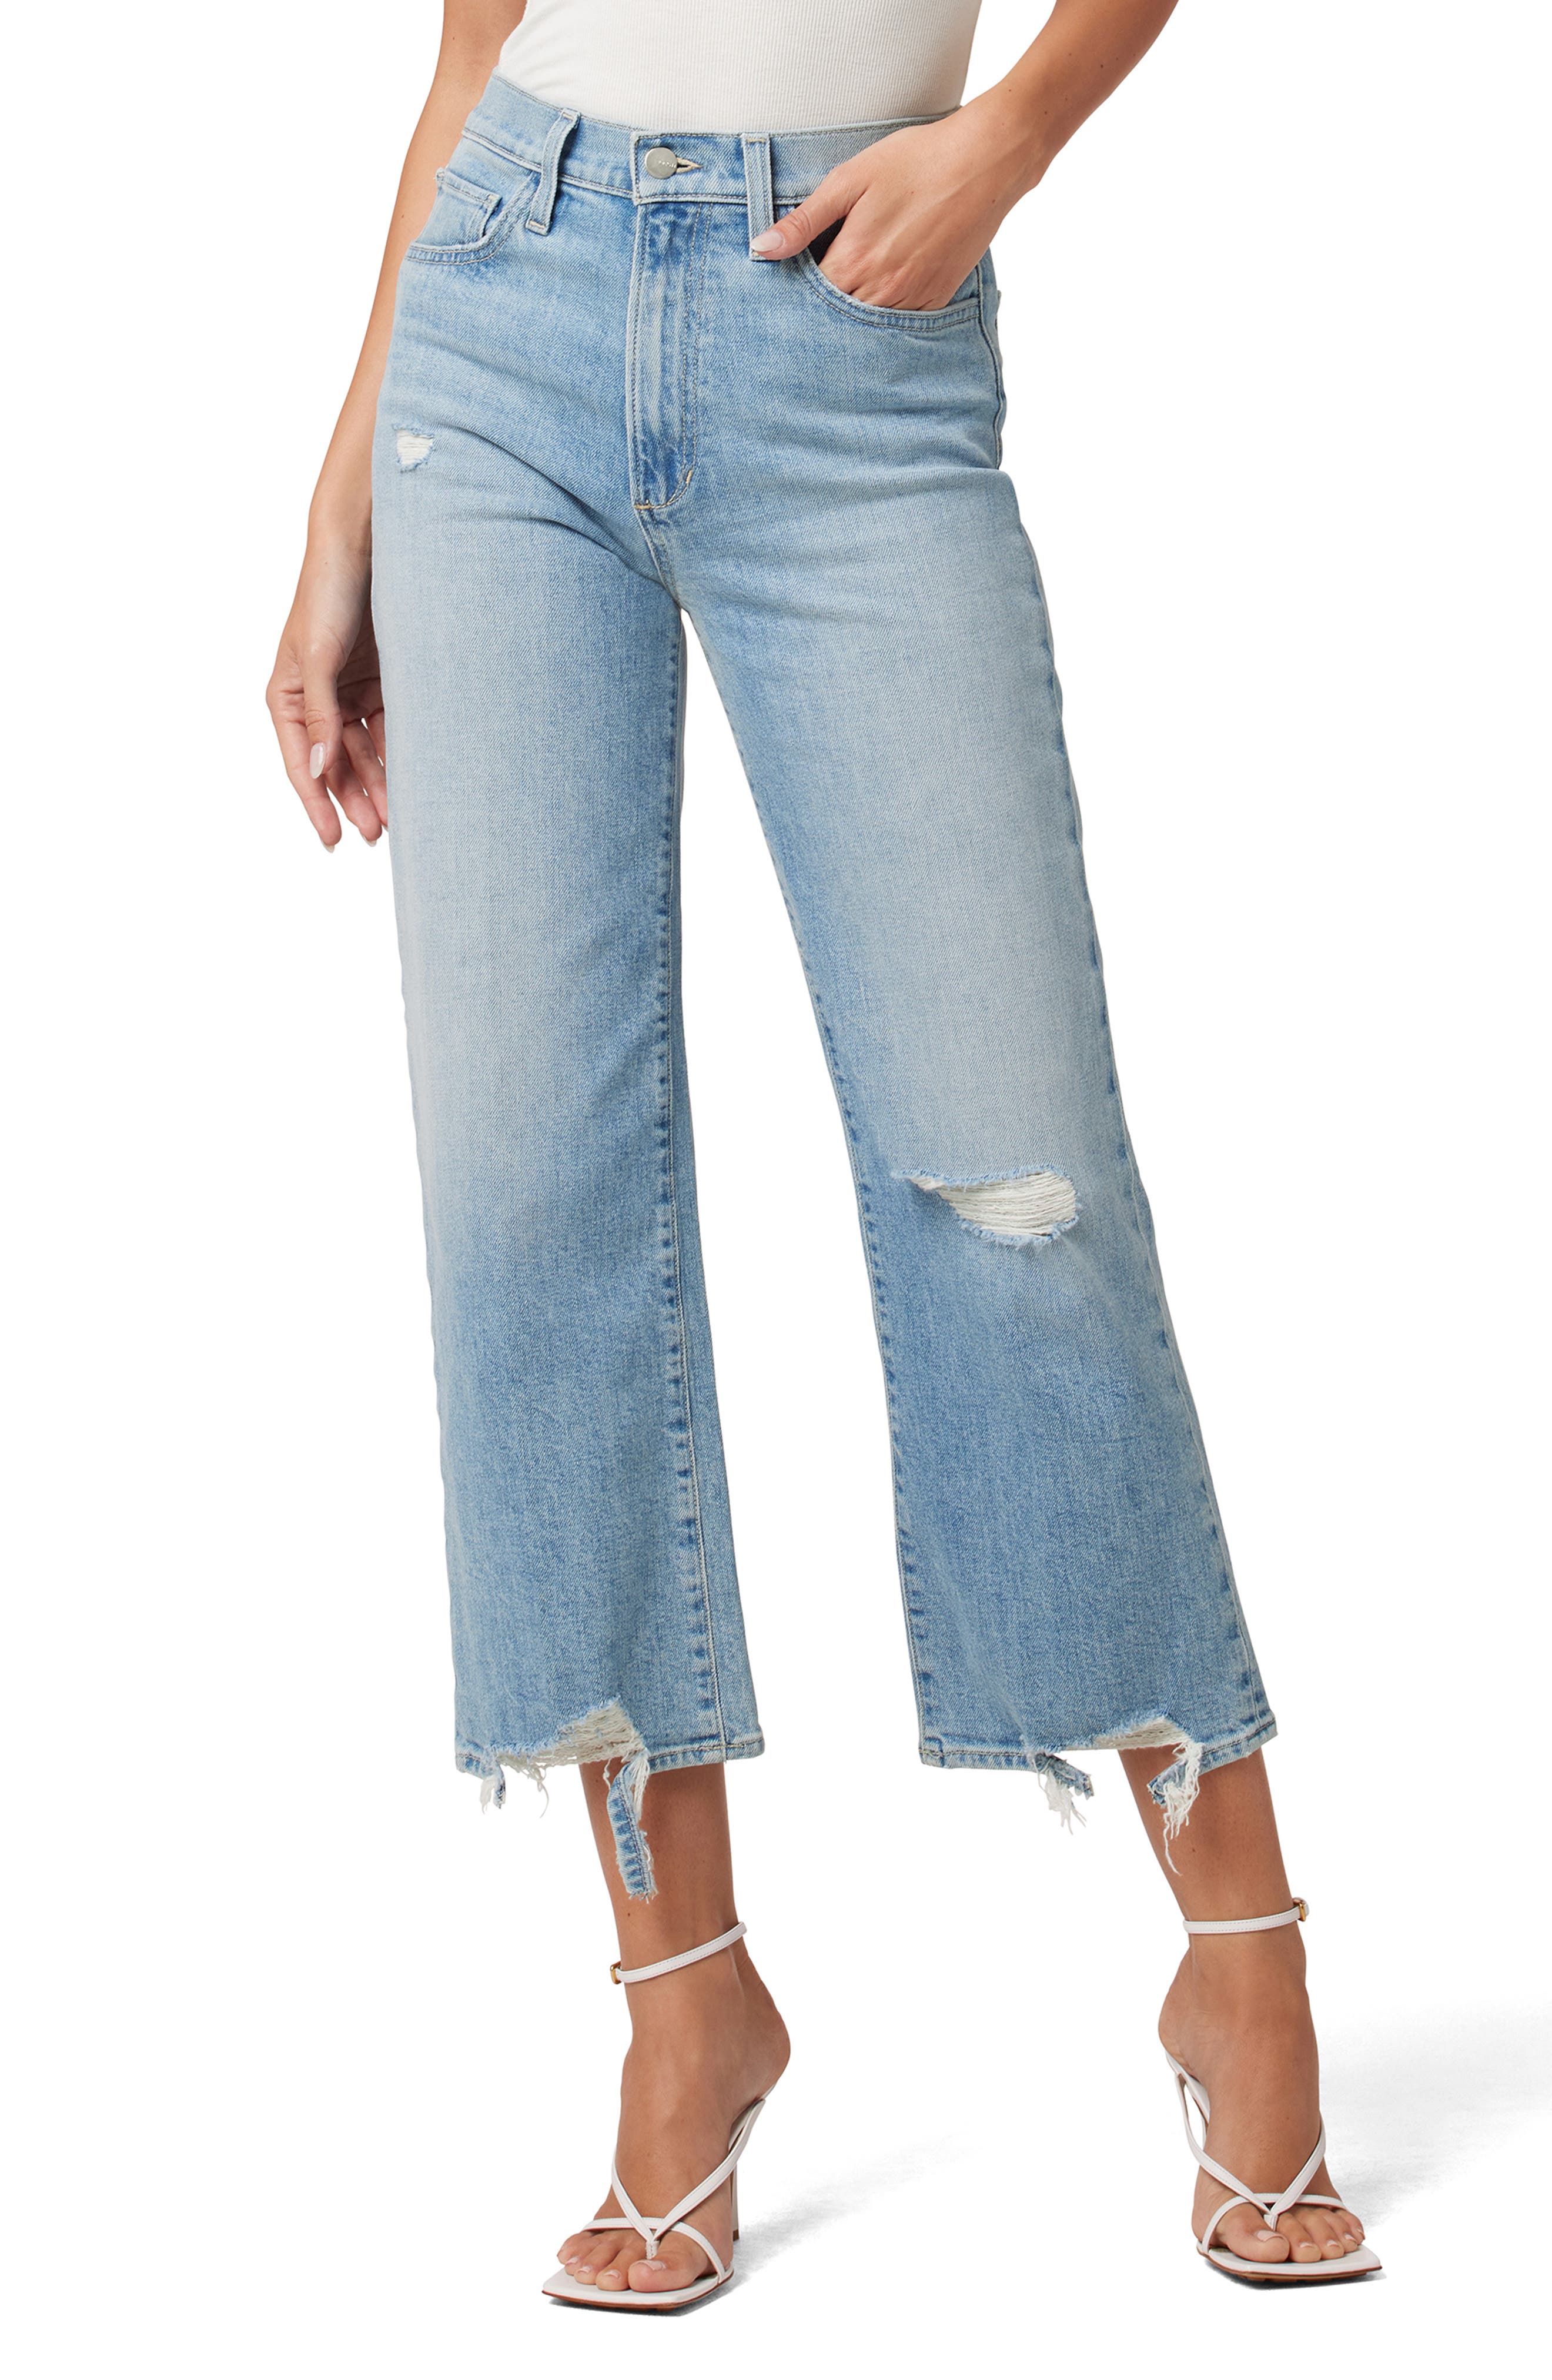 Joes Jeans Denim High-rise Bootcut Cropped Jeans in Blue Womens Clothing Jeans Capri and cropped jeans 